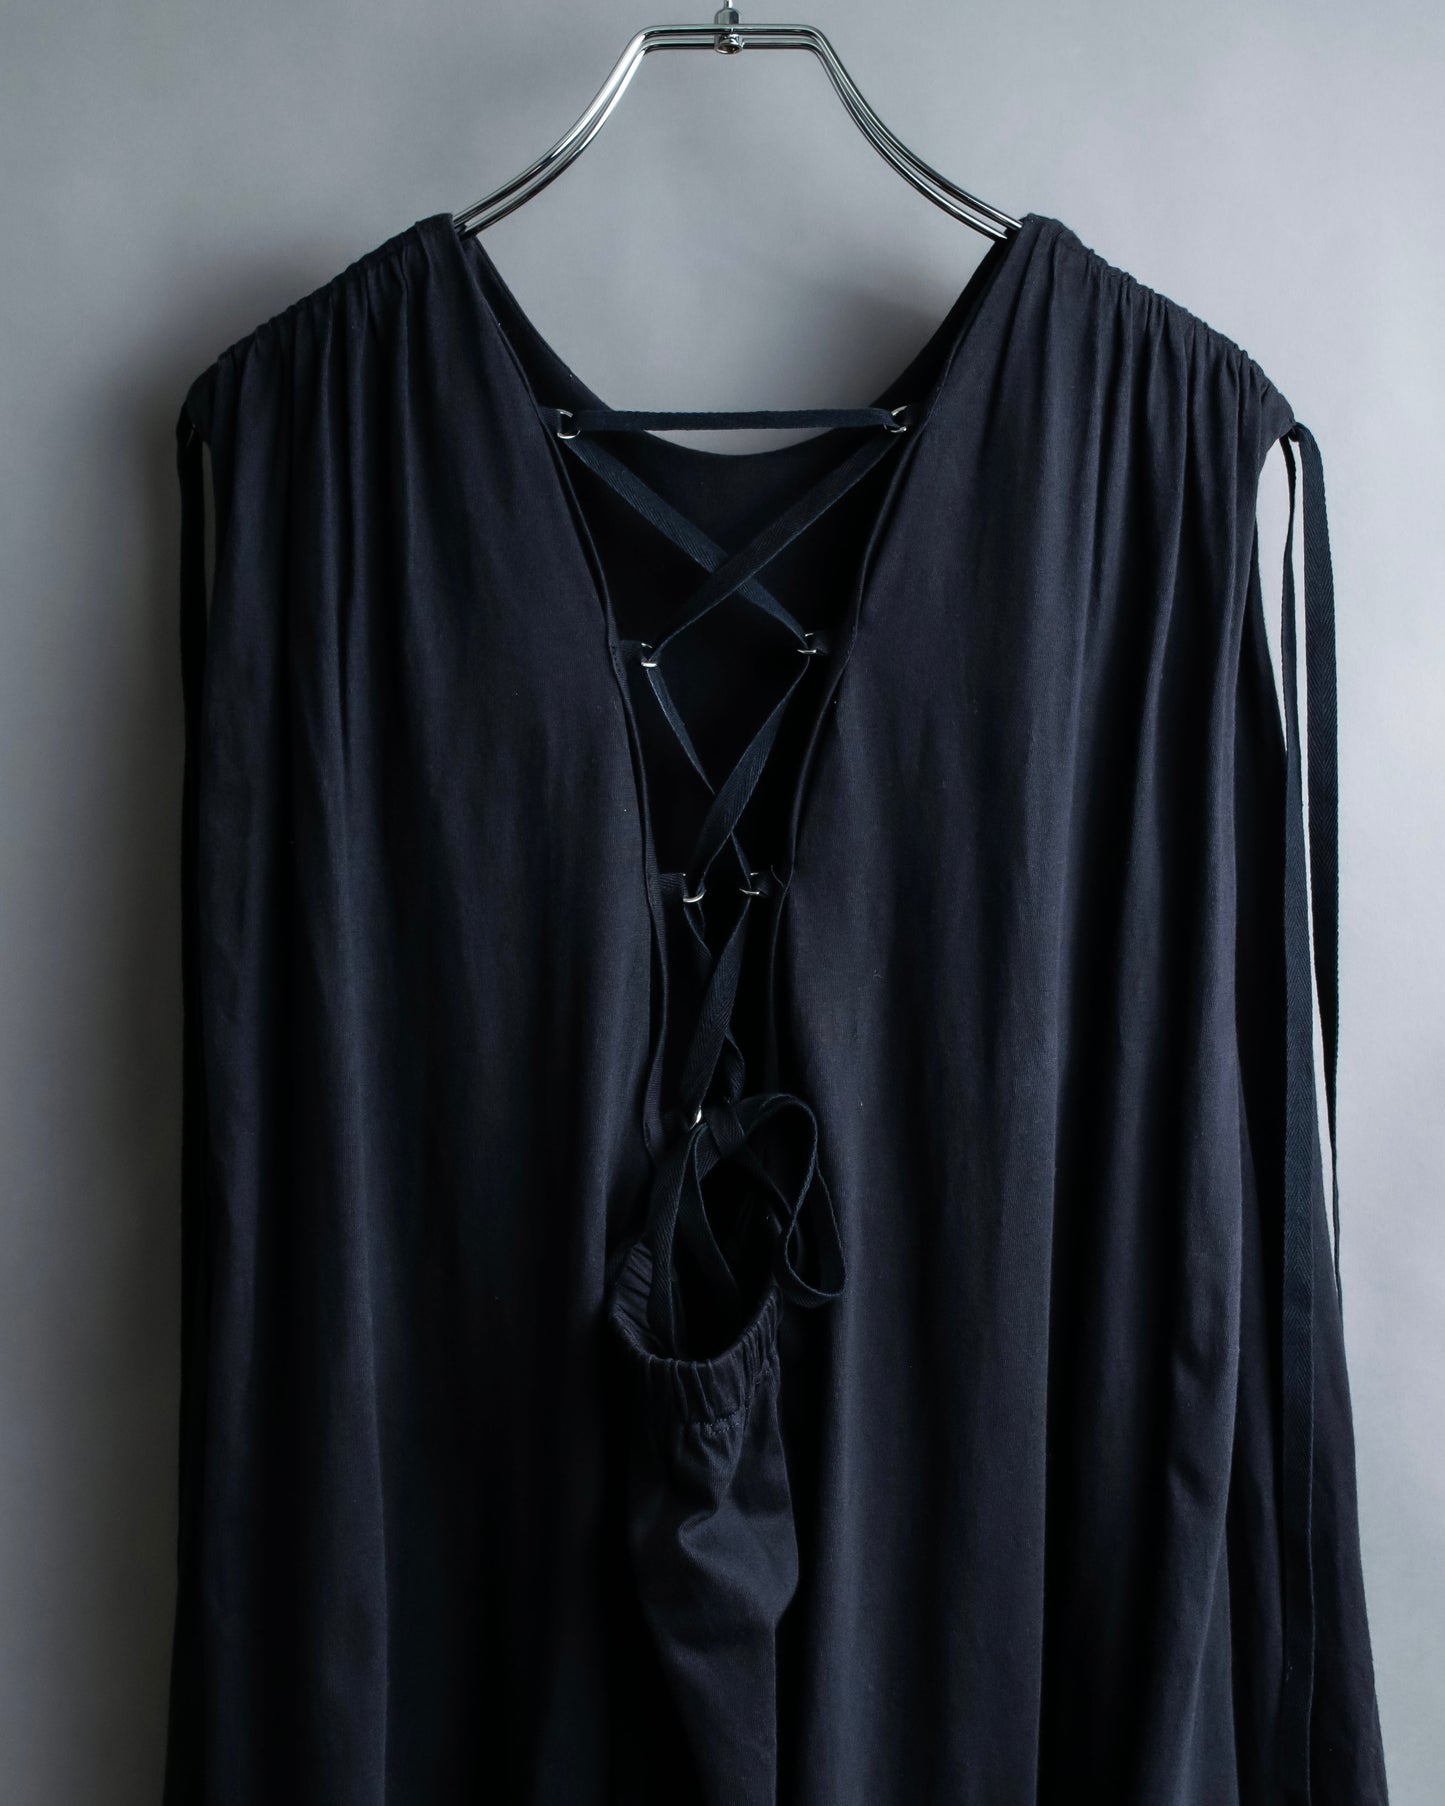 “N°21” Lace up designed no sleeves one piece